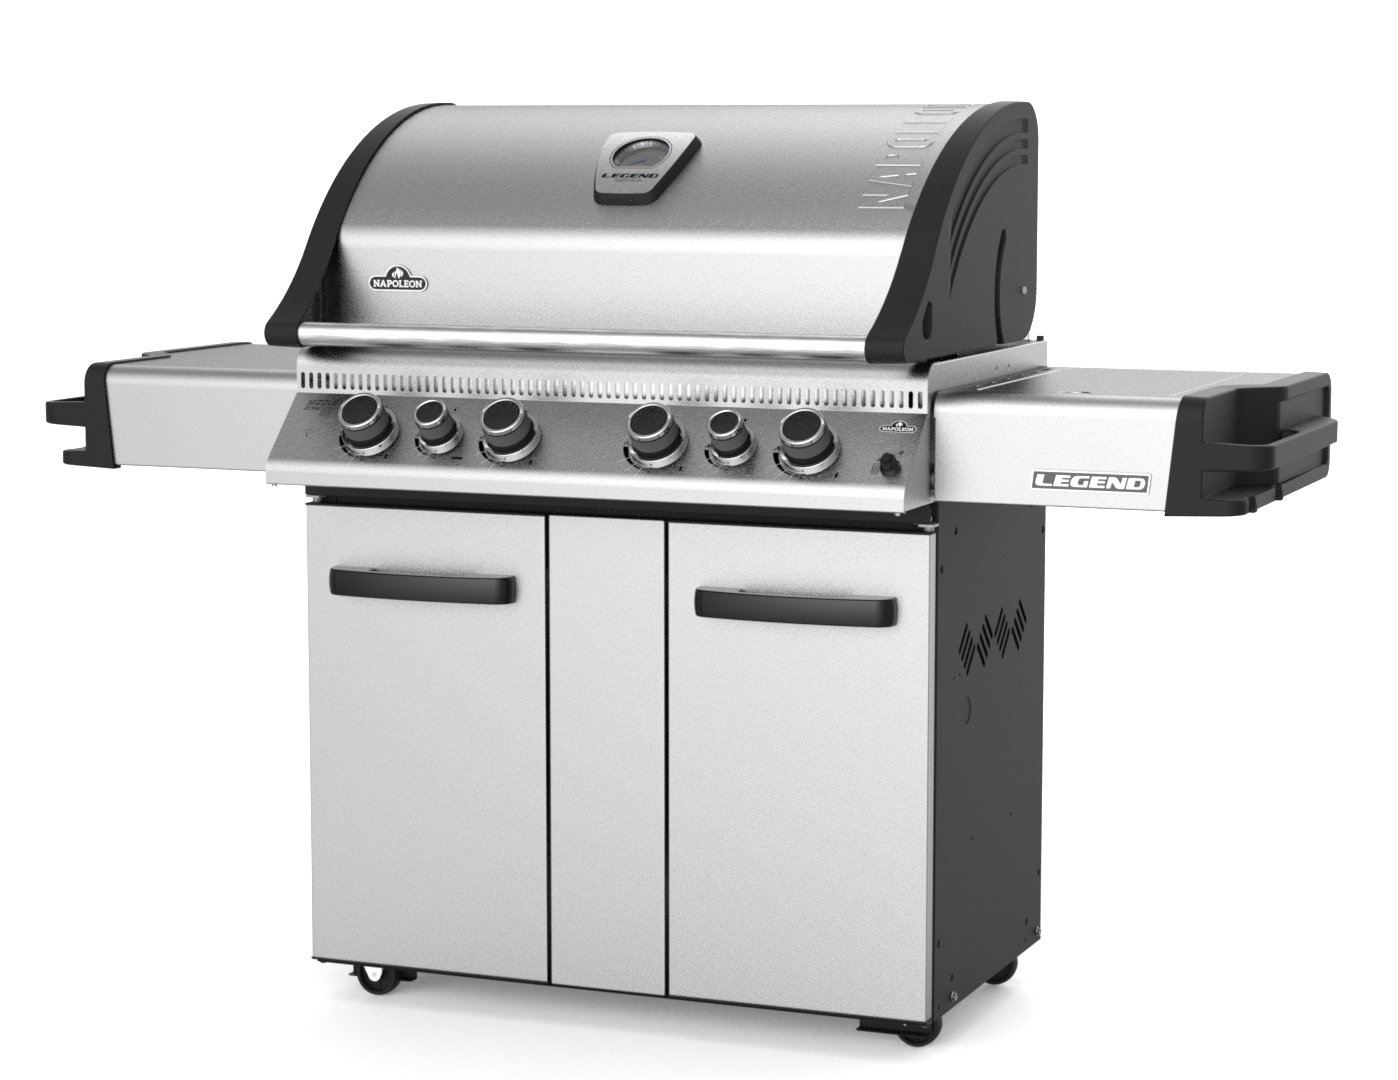 napoleon-prestige-665-stand-alone-gas-grill-with-infrared-side-and-rear